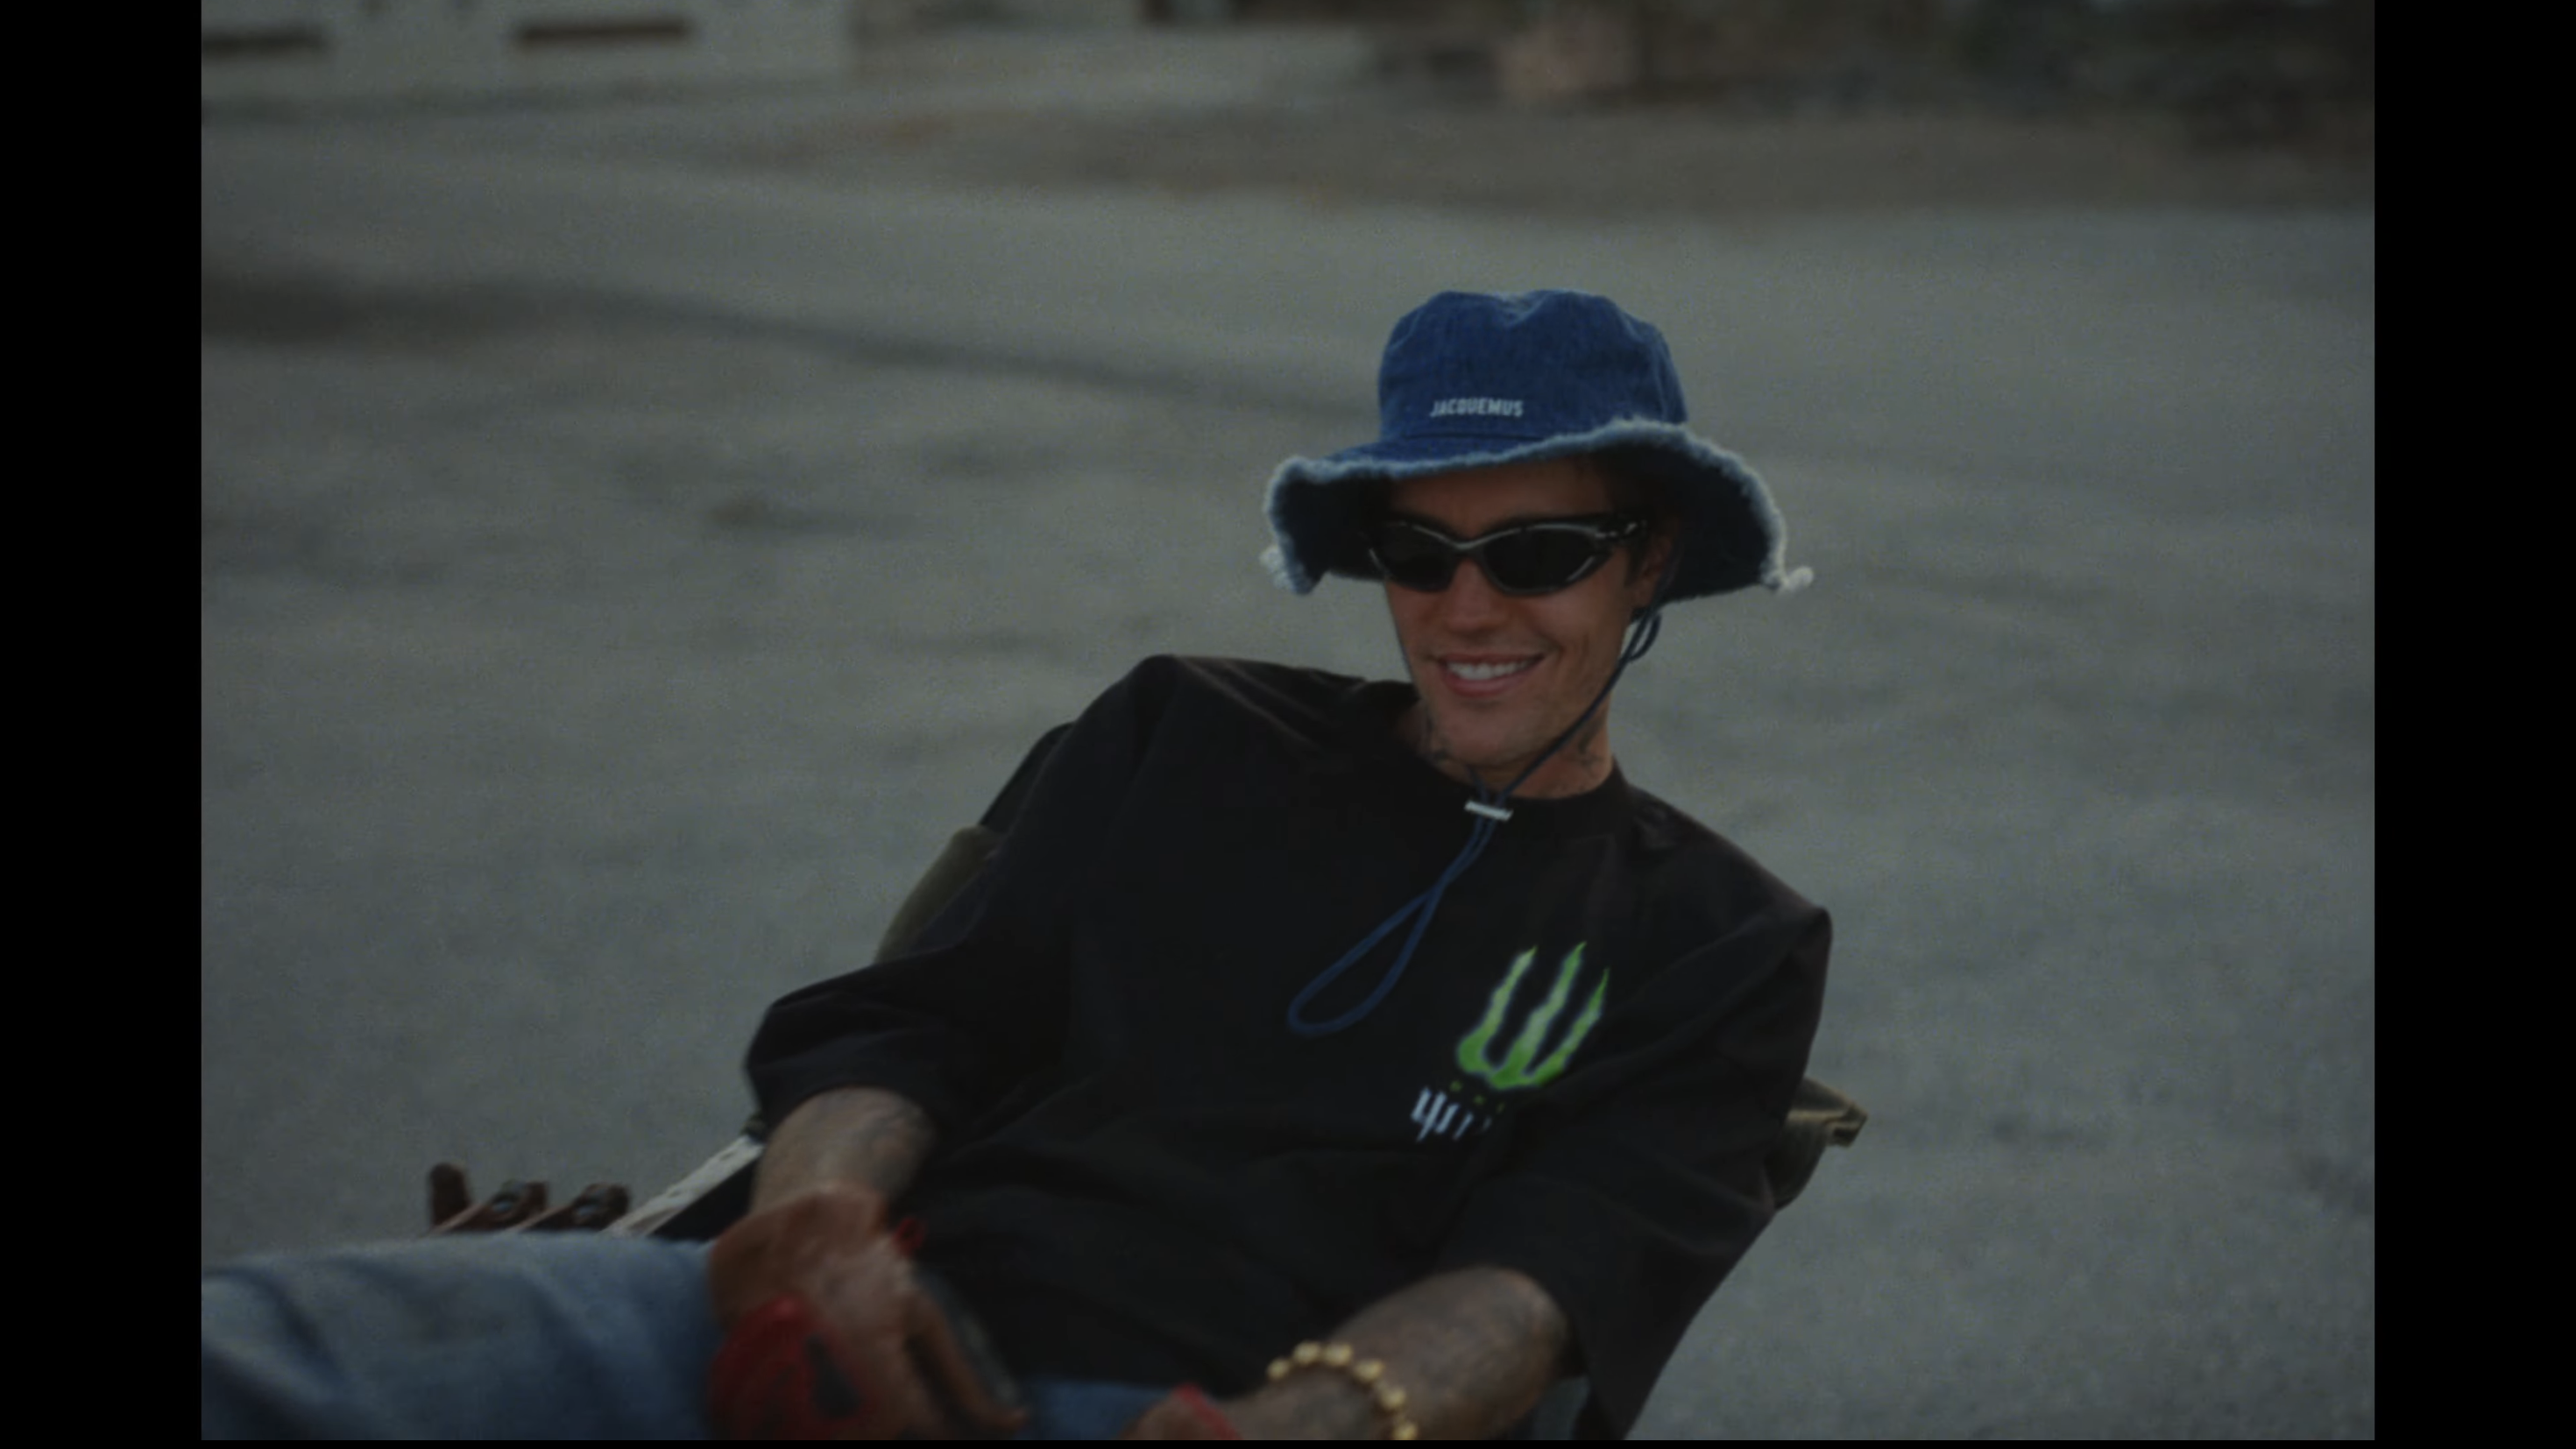 Screenshot of Justin in the video smiling and leaning back in a chair